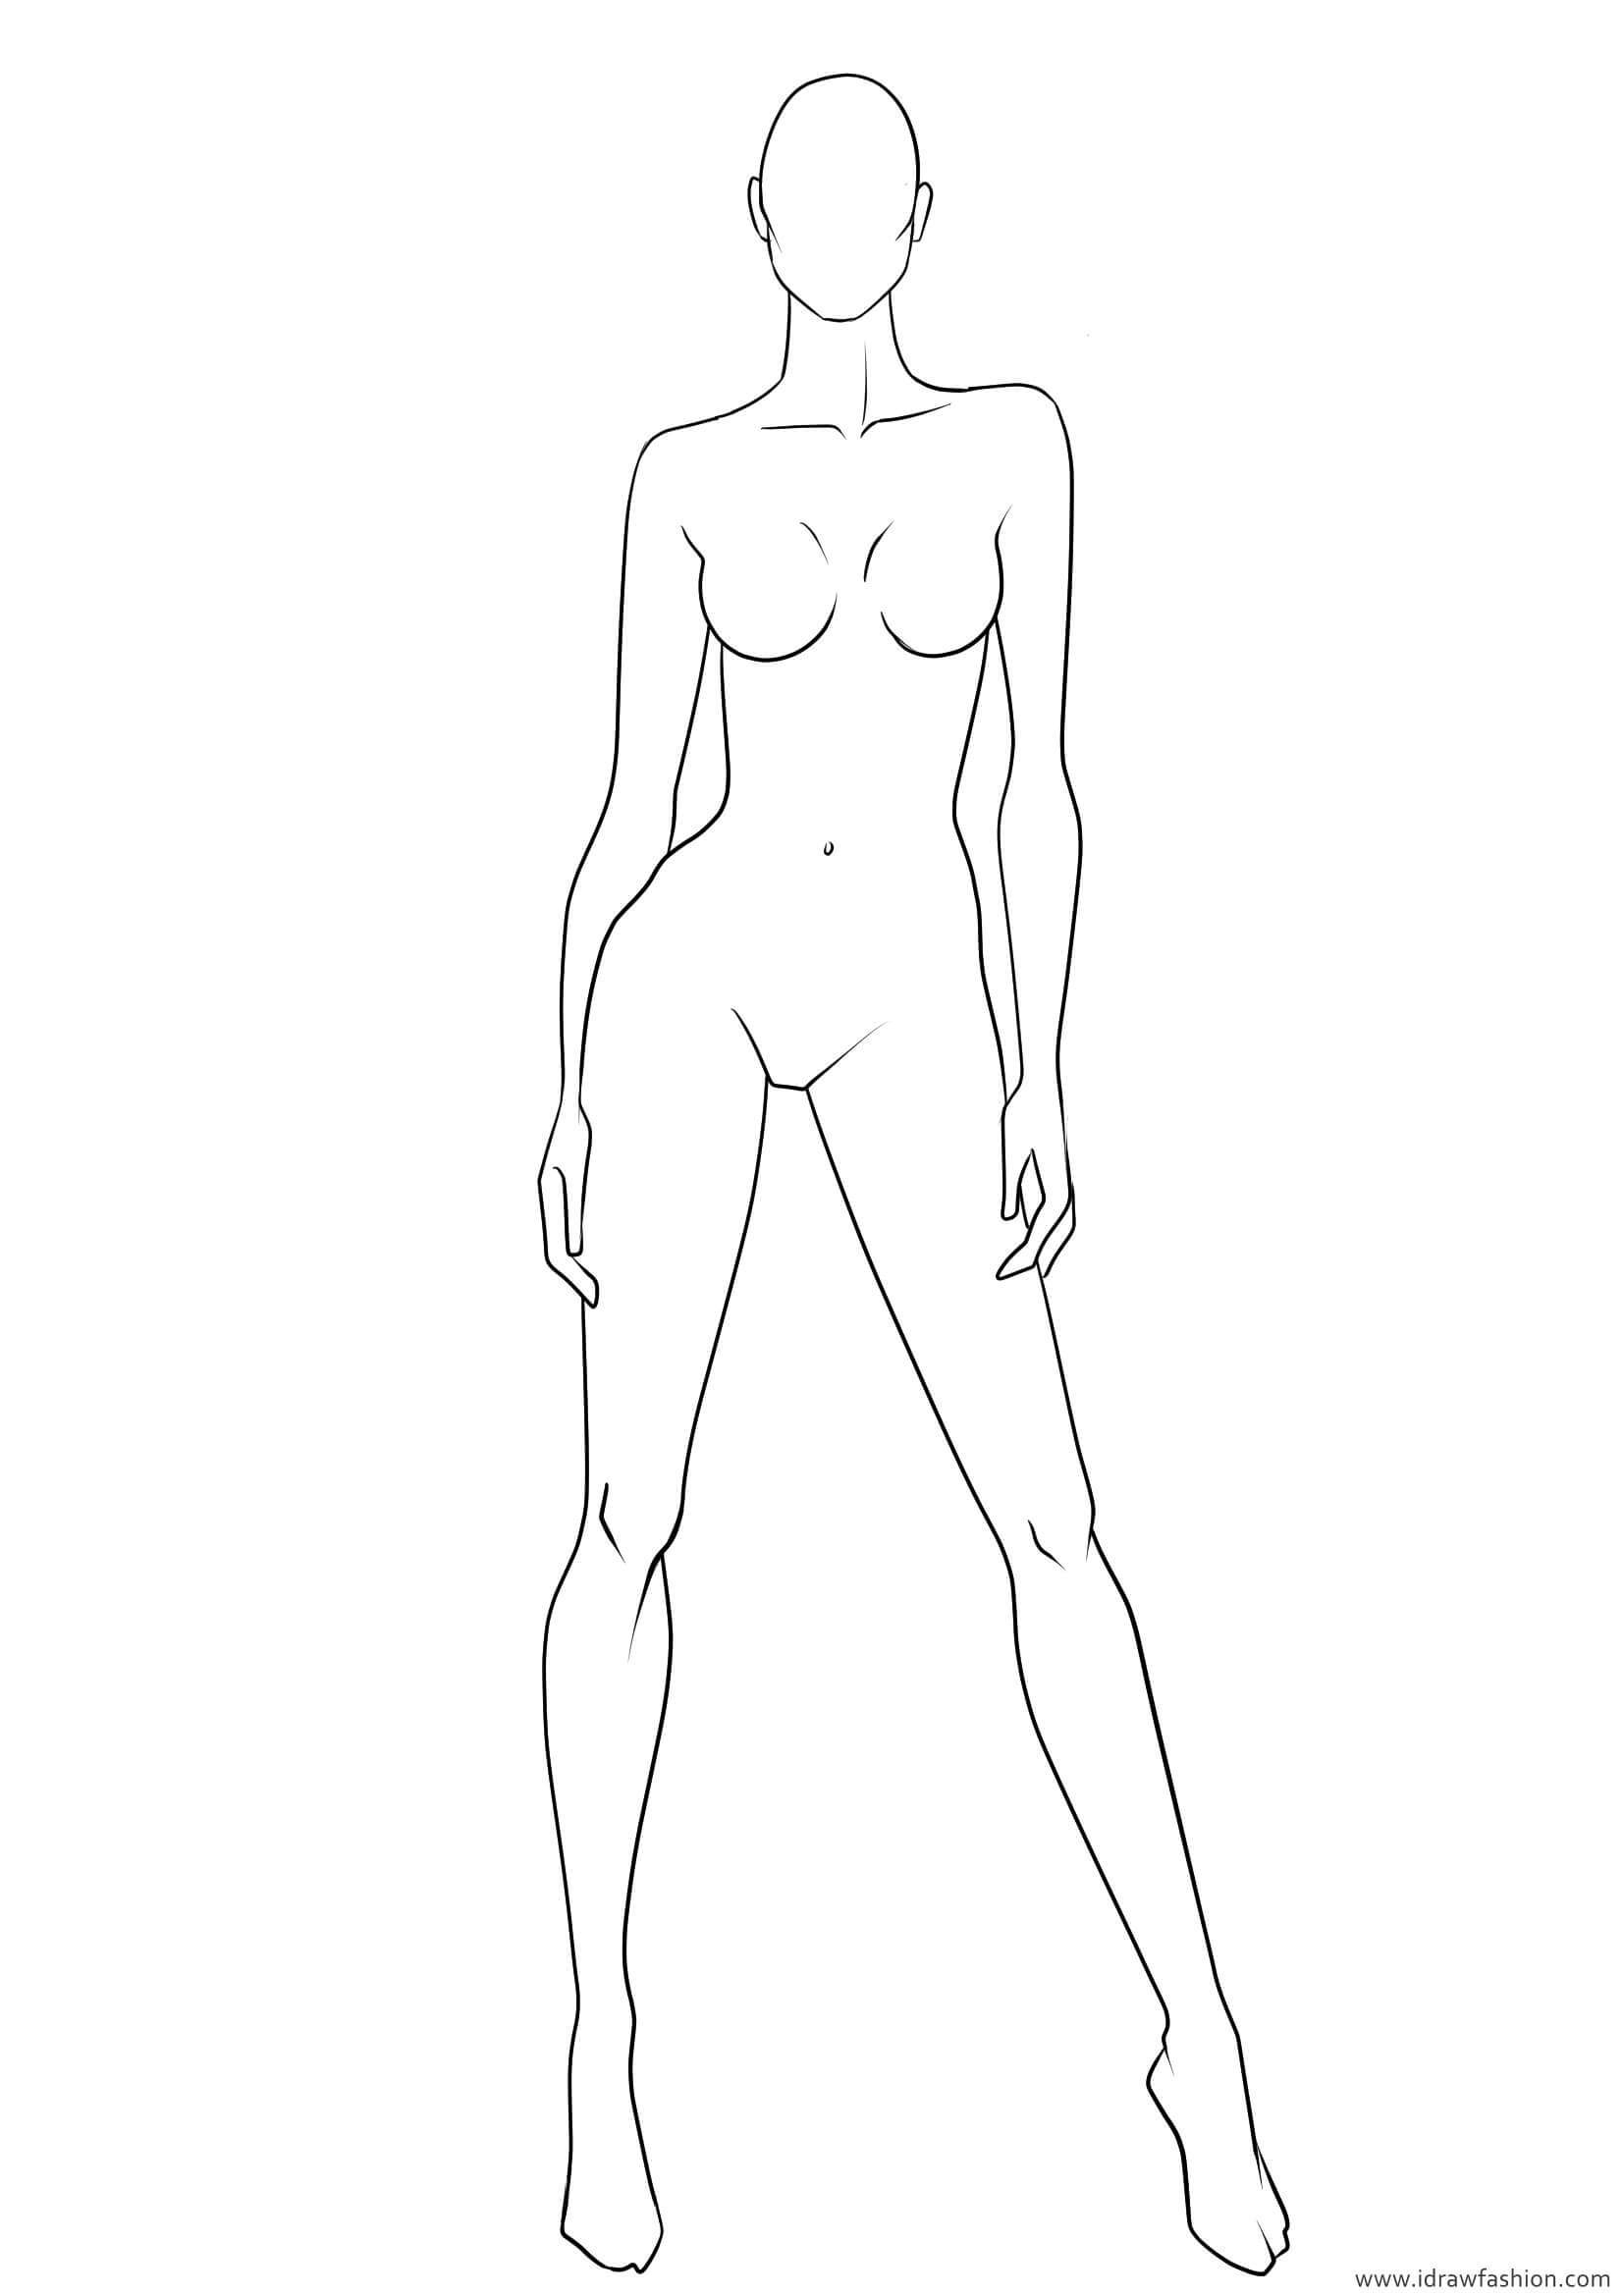 Blank Body Sketch At Paintingvalley | Explore Collection Inside Blank Model Sketch Template